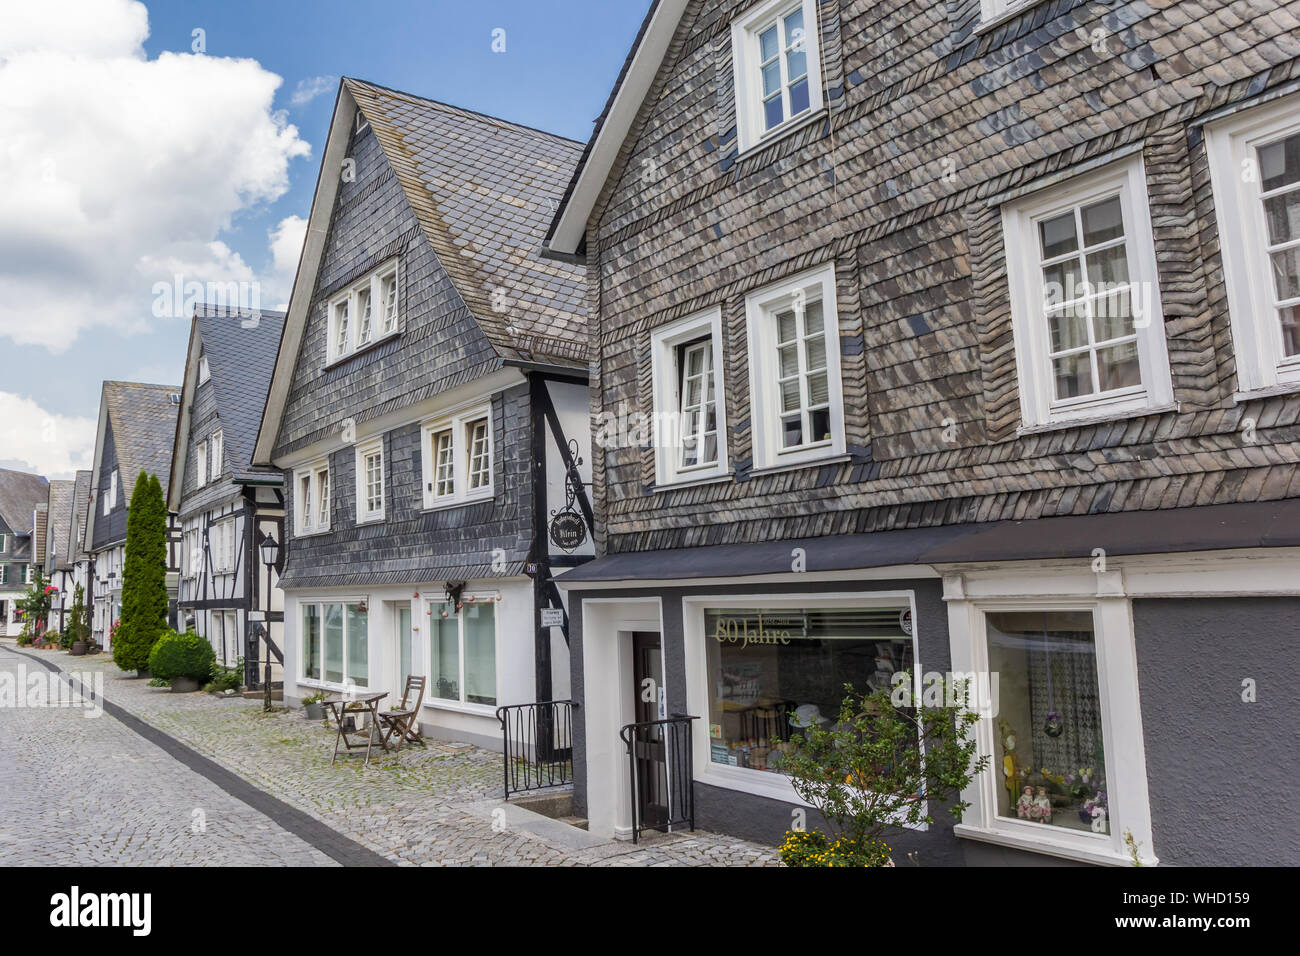 Cobblestoned street with half timbered houses in Freudenberg, Germany Stock Photo